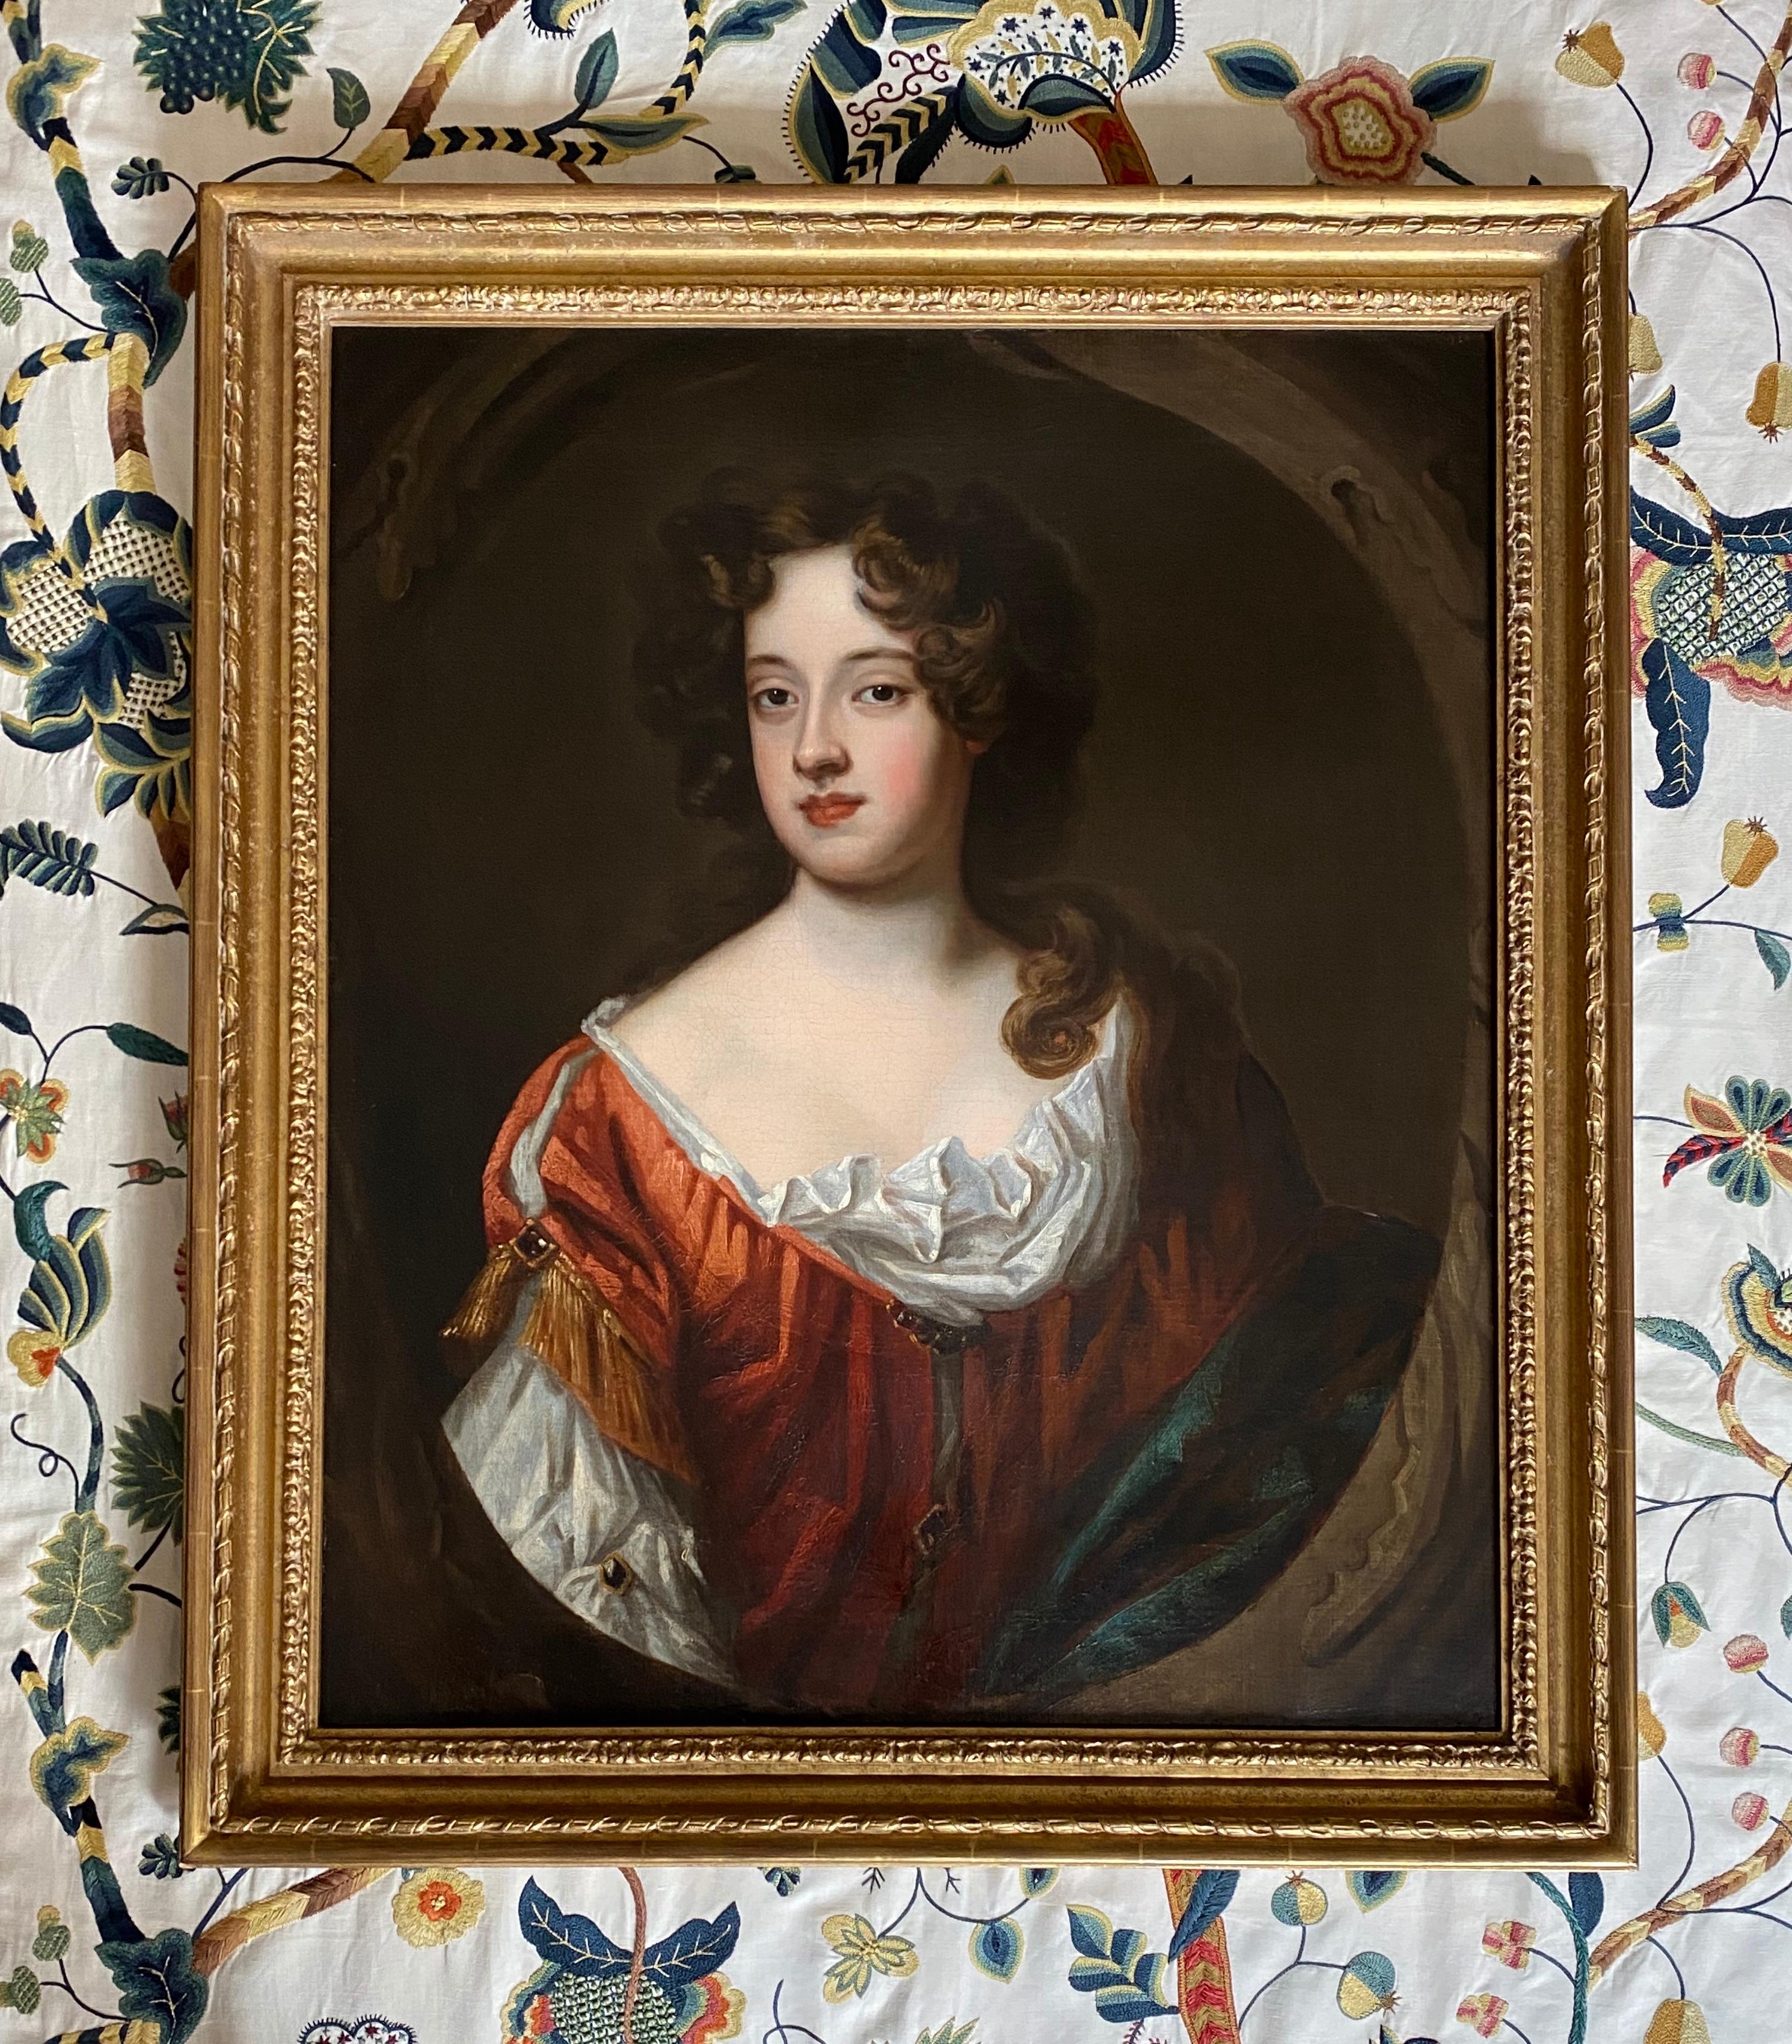 LATE 17TH CENTURY PORTRAIT OF ISABELLA FITZROY DUCHESS OF GRAFTON - CIRCLE OF SIR PETER LELY.
Fine and sensitively rendered late 17th century oil on canvas portrait of Isabella Fitzroy, Duchess of Grafton and later 2nd Countess of Arlington (c.1668